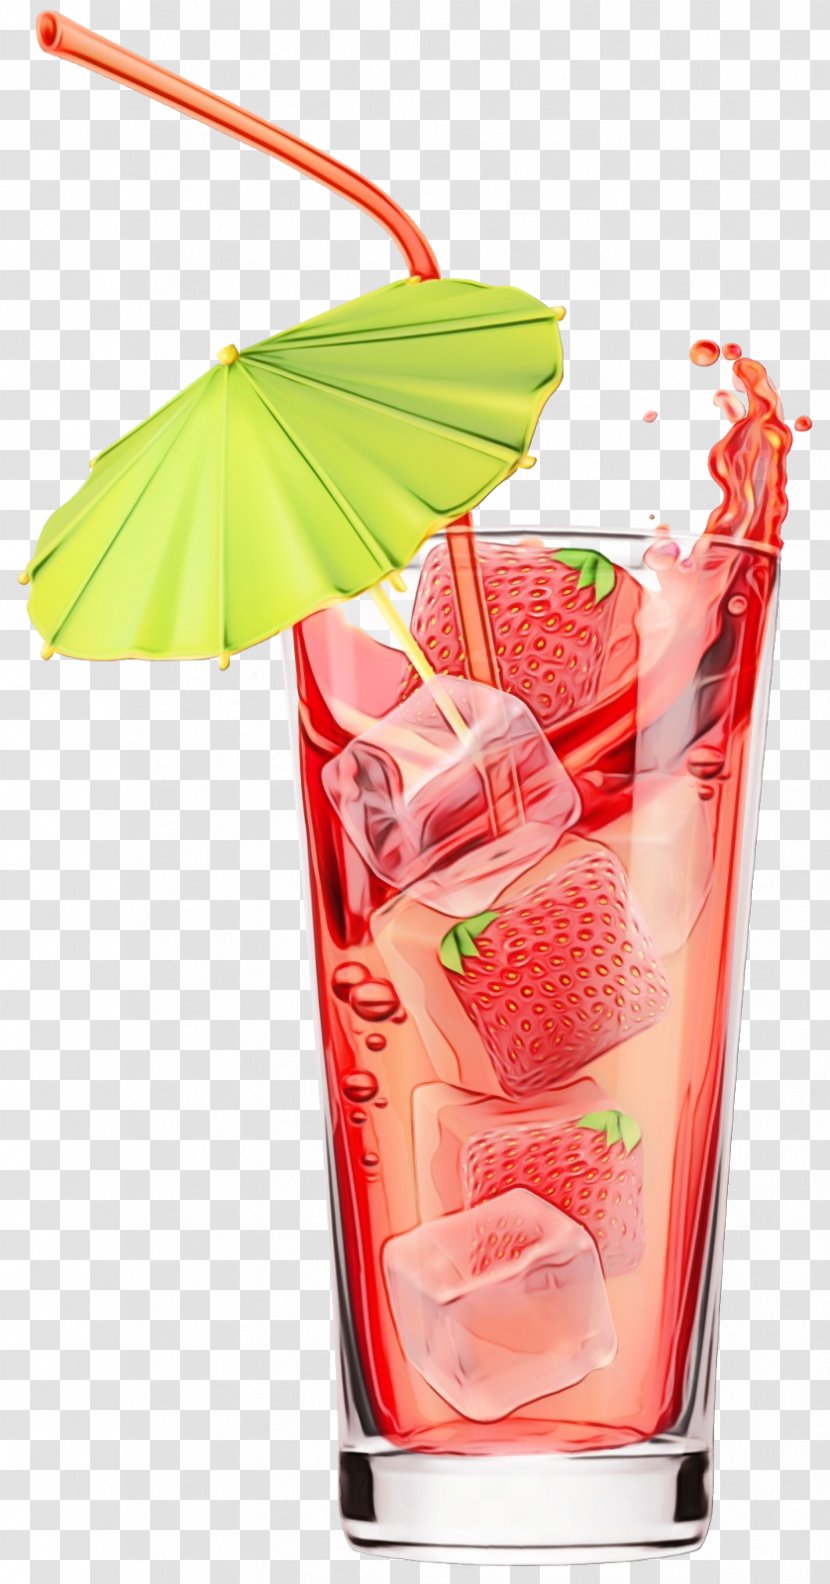 Zombie Cartoon - Smoothie - Drinking Straw Wine Cocktail Transparent PNG